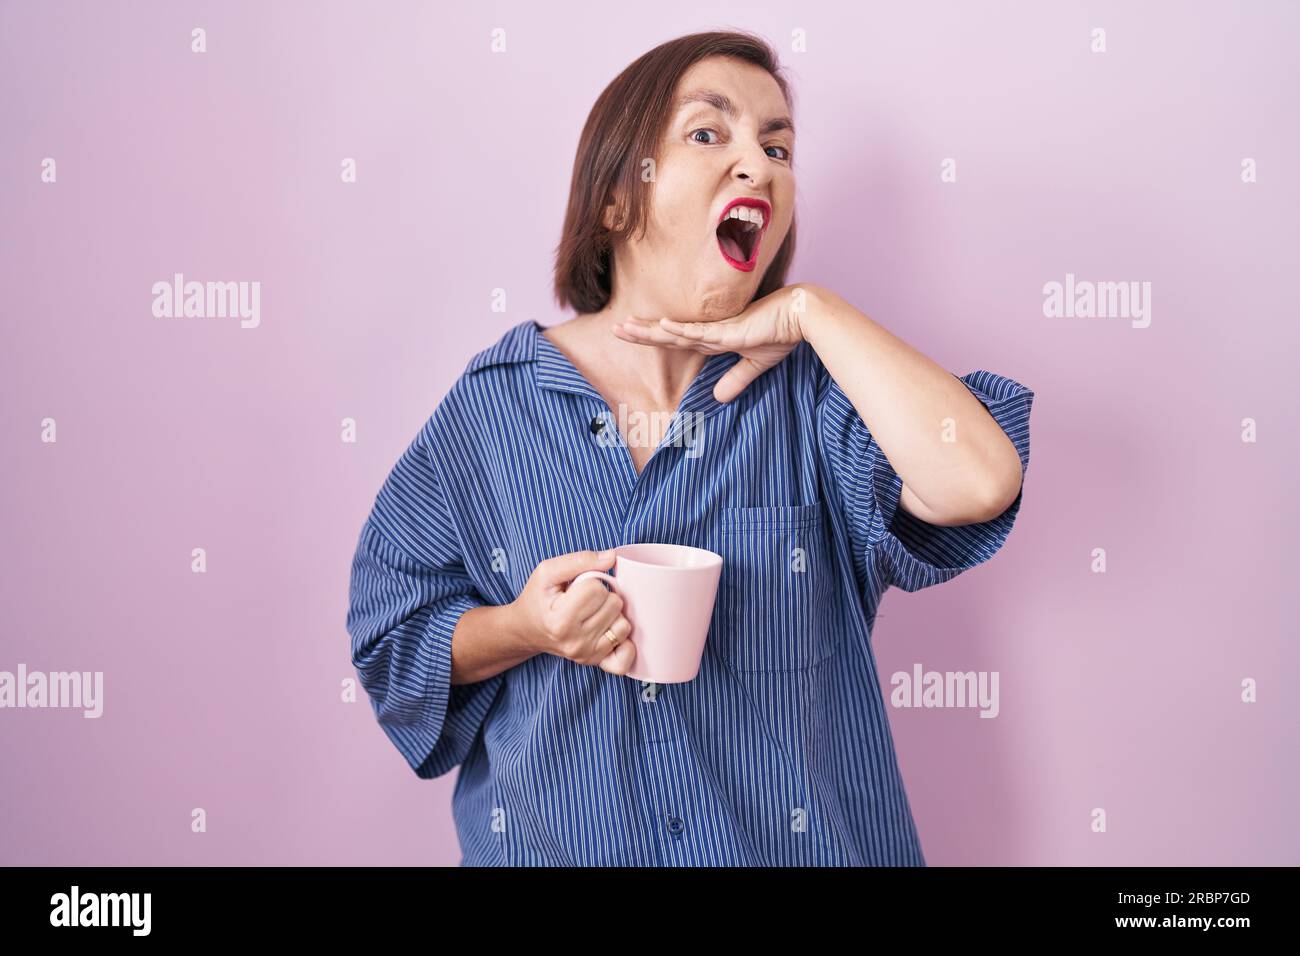 Middle age hispanic woman drinking a cup coffee cutting throat with hand as knife, threaten aggression with furious violence Stock Photo